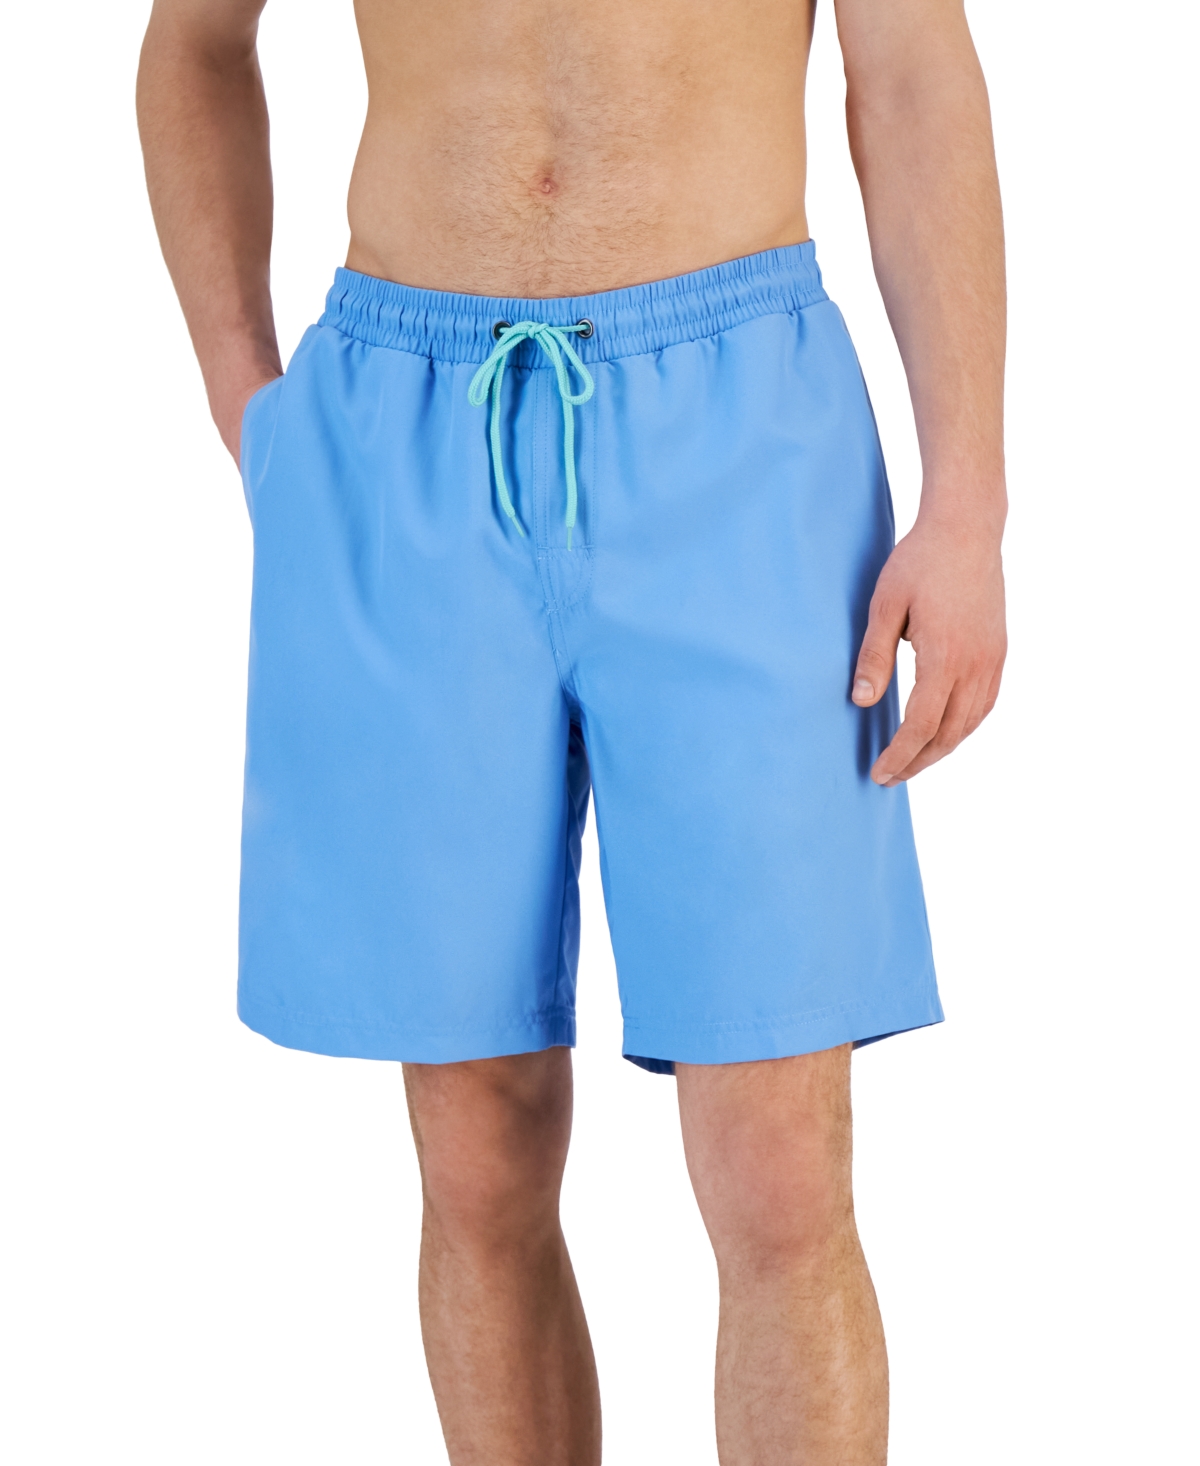 CLUB ROOM MEN'S QUICK-DRY PERFORMANCE SOLID 9" SWIM TRUNKS, CREATED FOR MACY'S